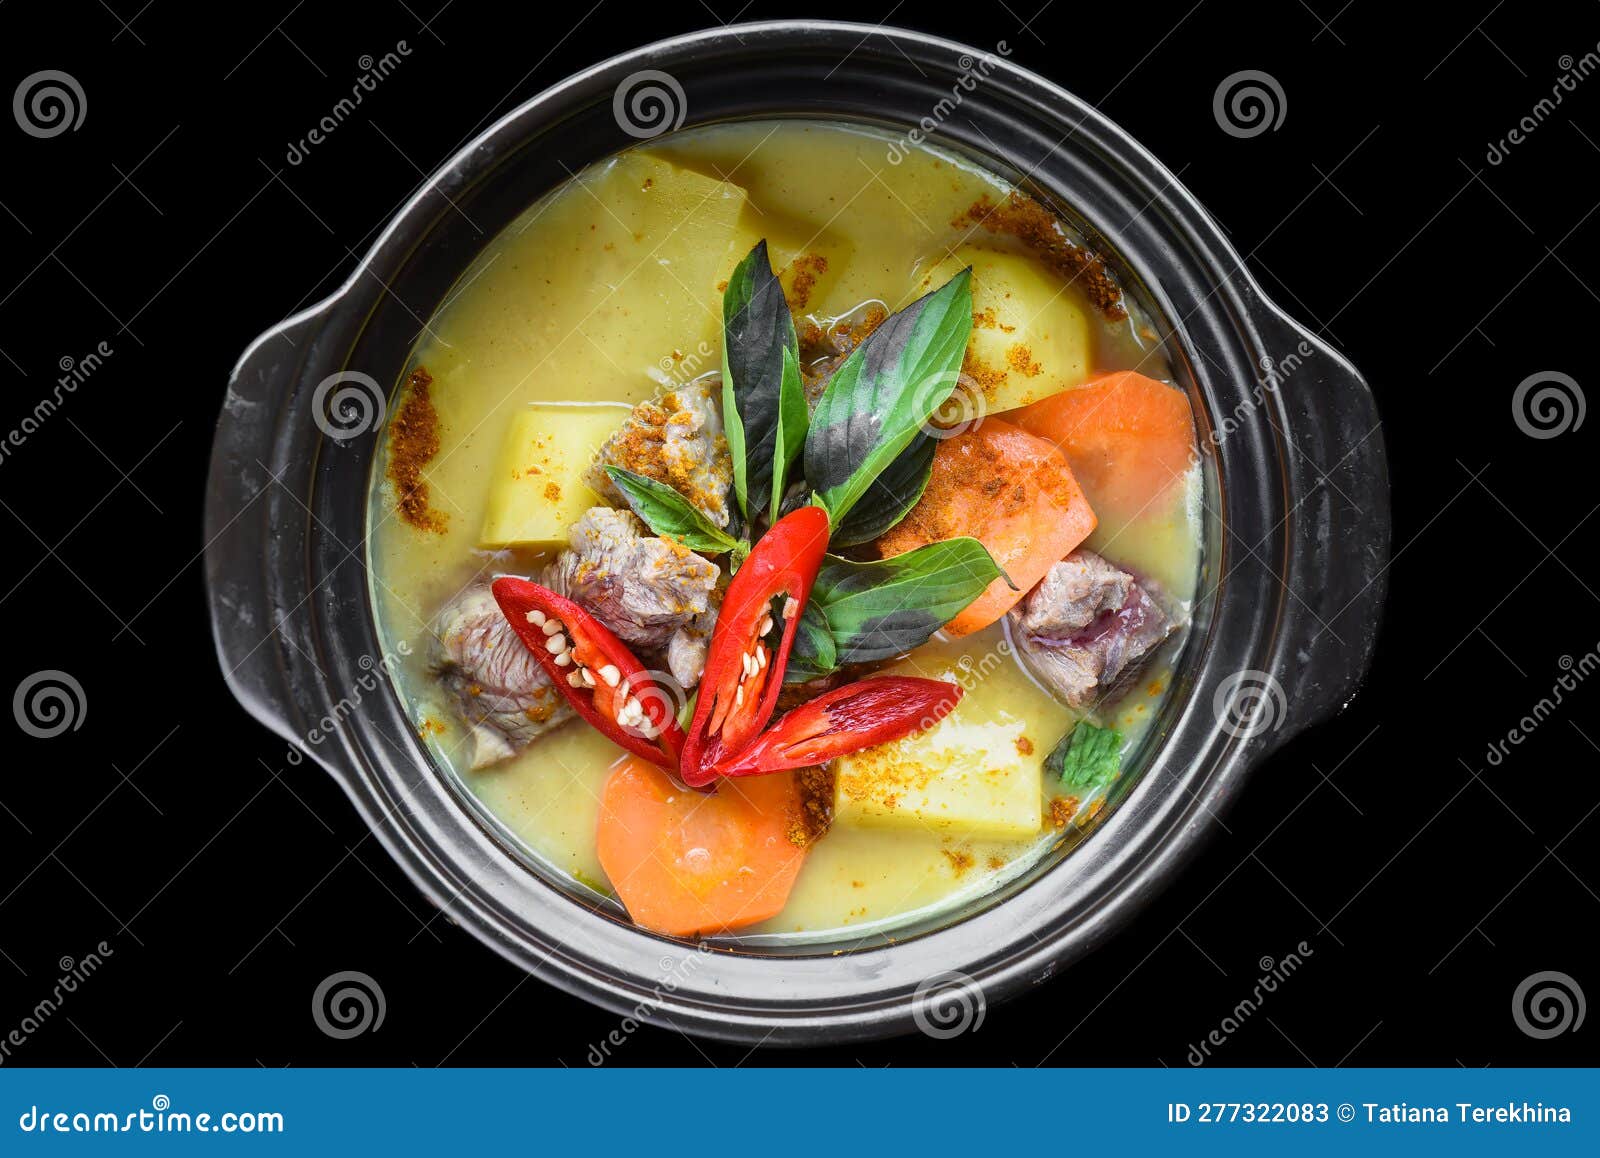 Vietnamese Bo Kho Stew or Potato Soup with Beef and Carrots Stock Image ...